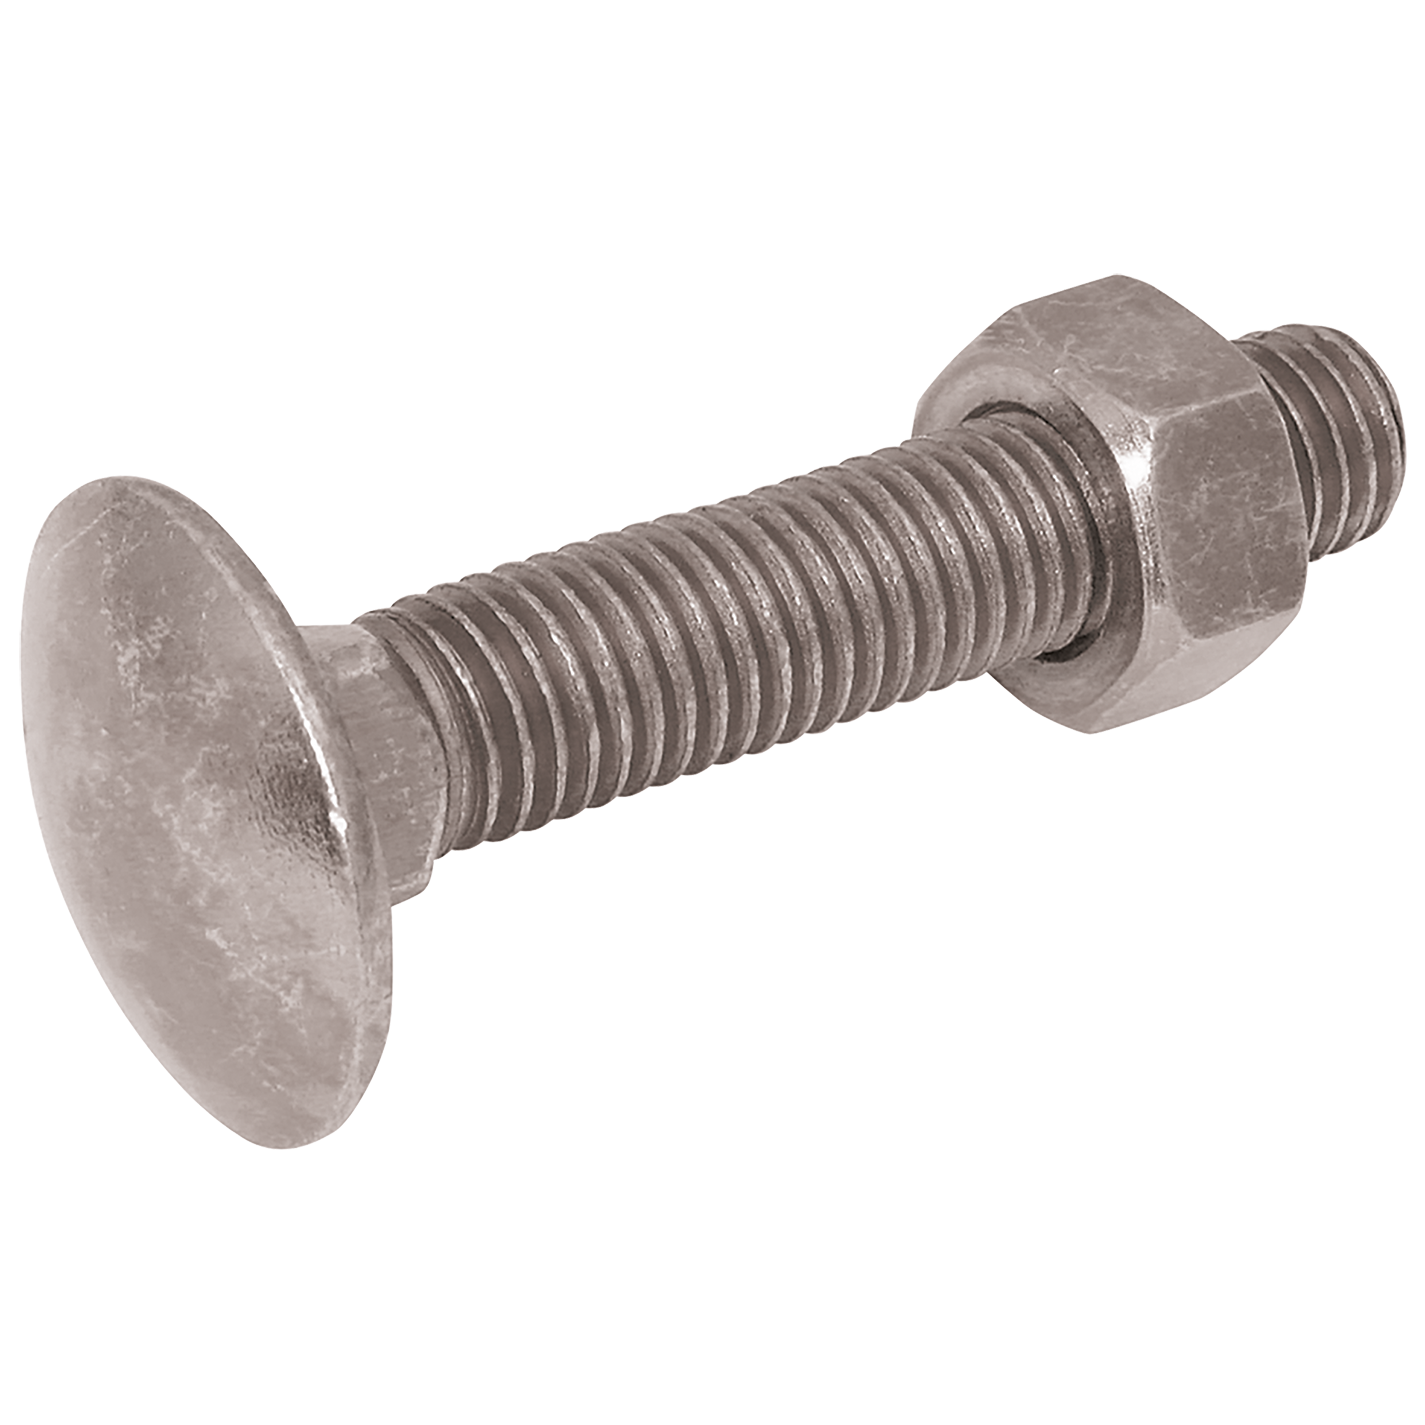 NUT AND BOLT M10 X 50 SQ RD HEX